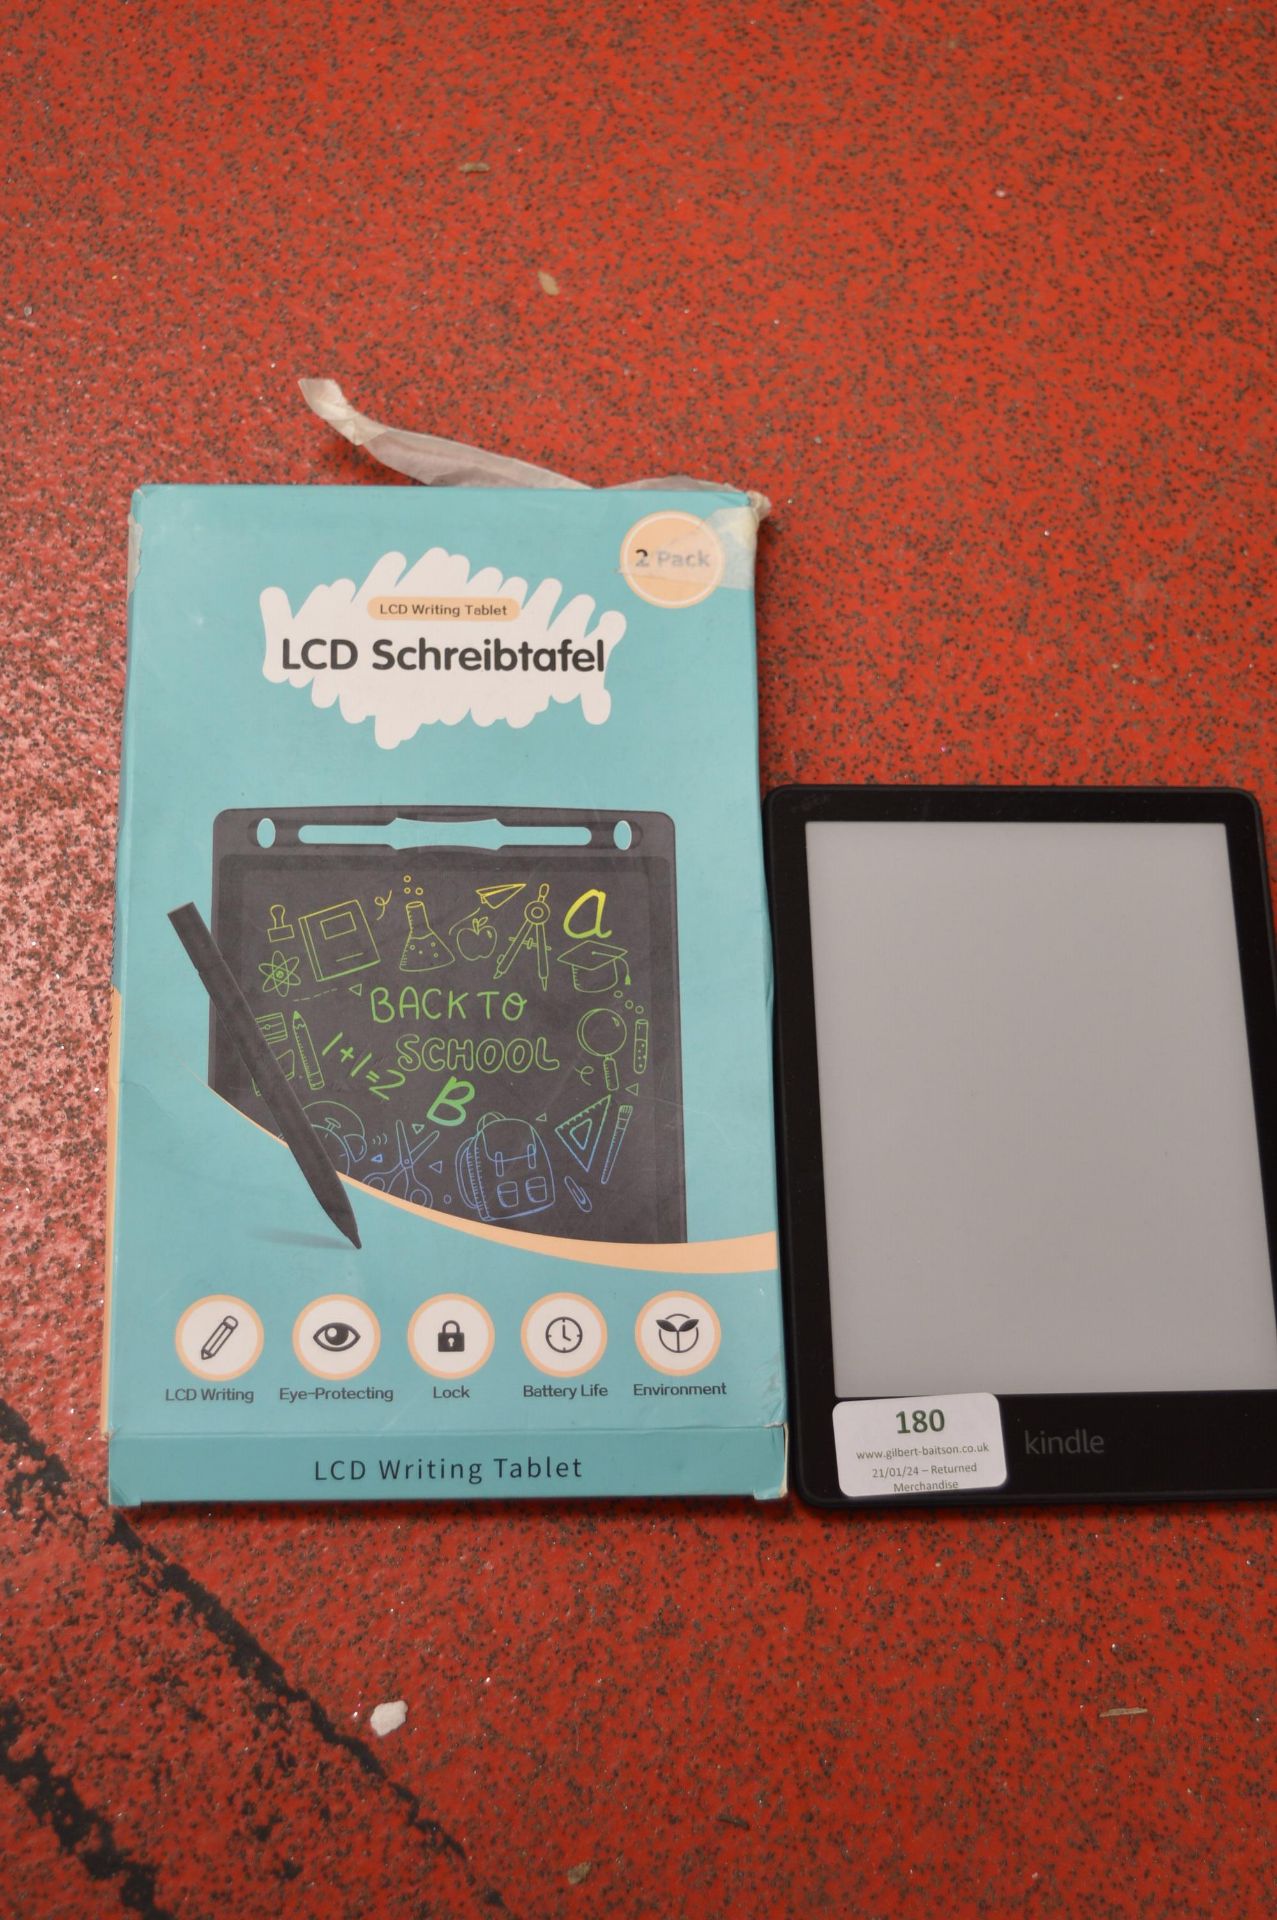 *Kindle M2L3UK, and Two LCD Writing Tablets